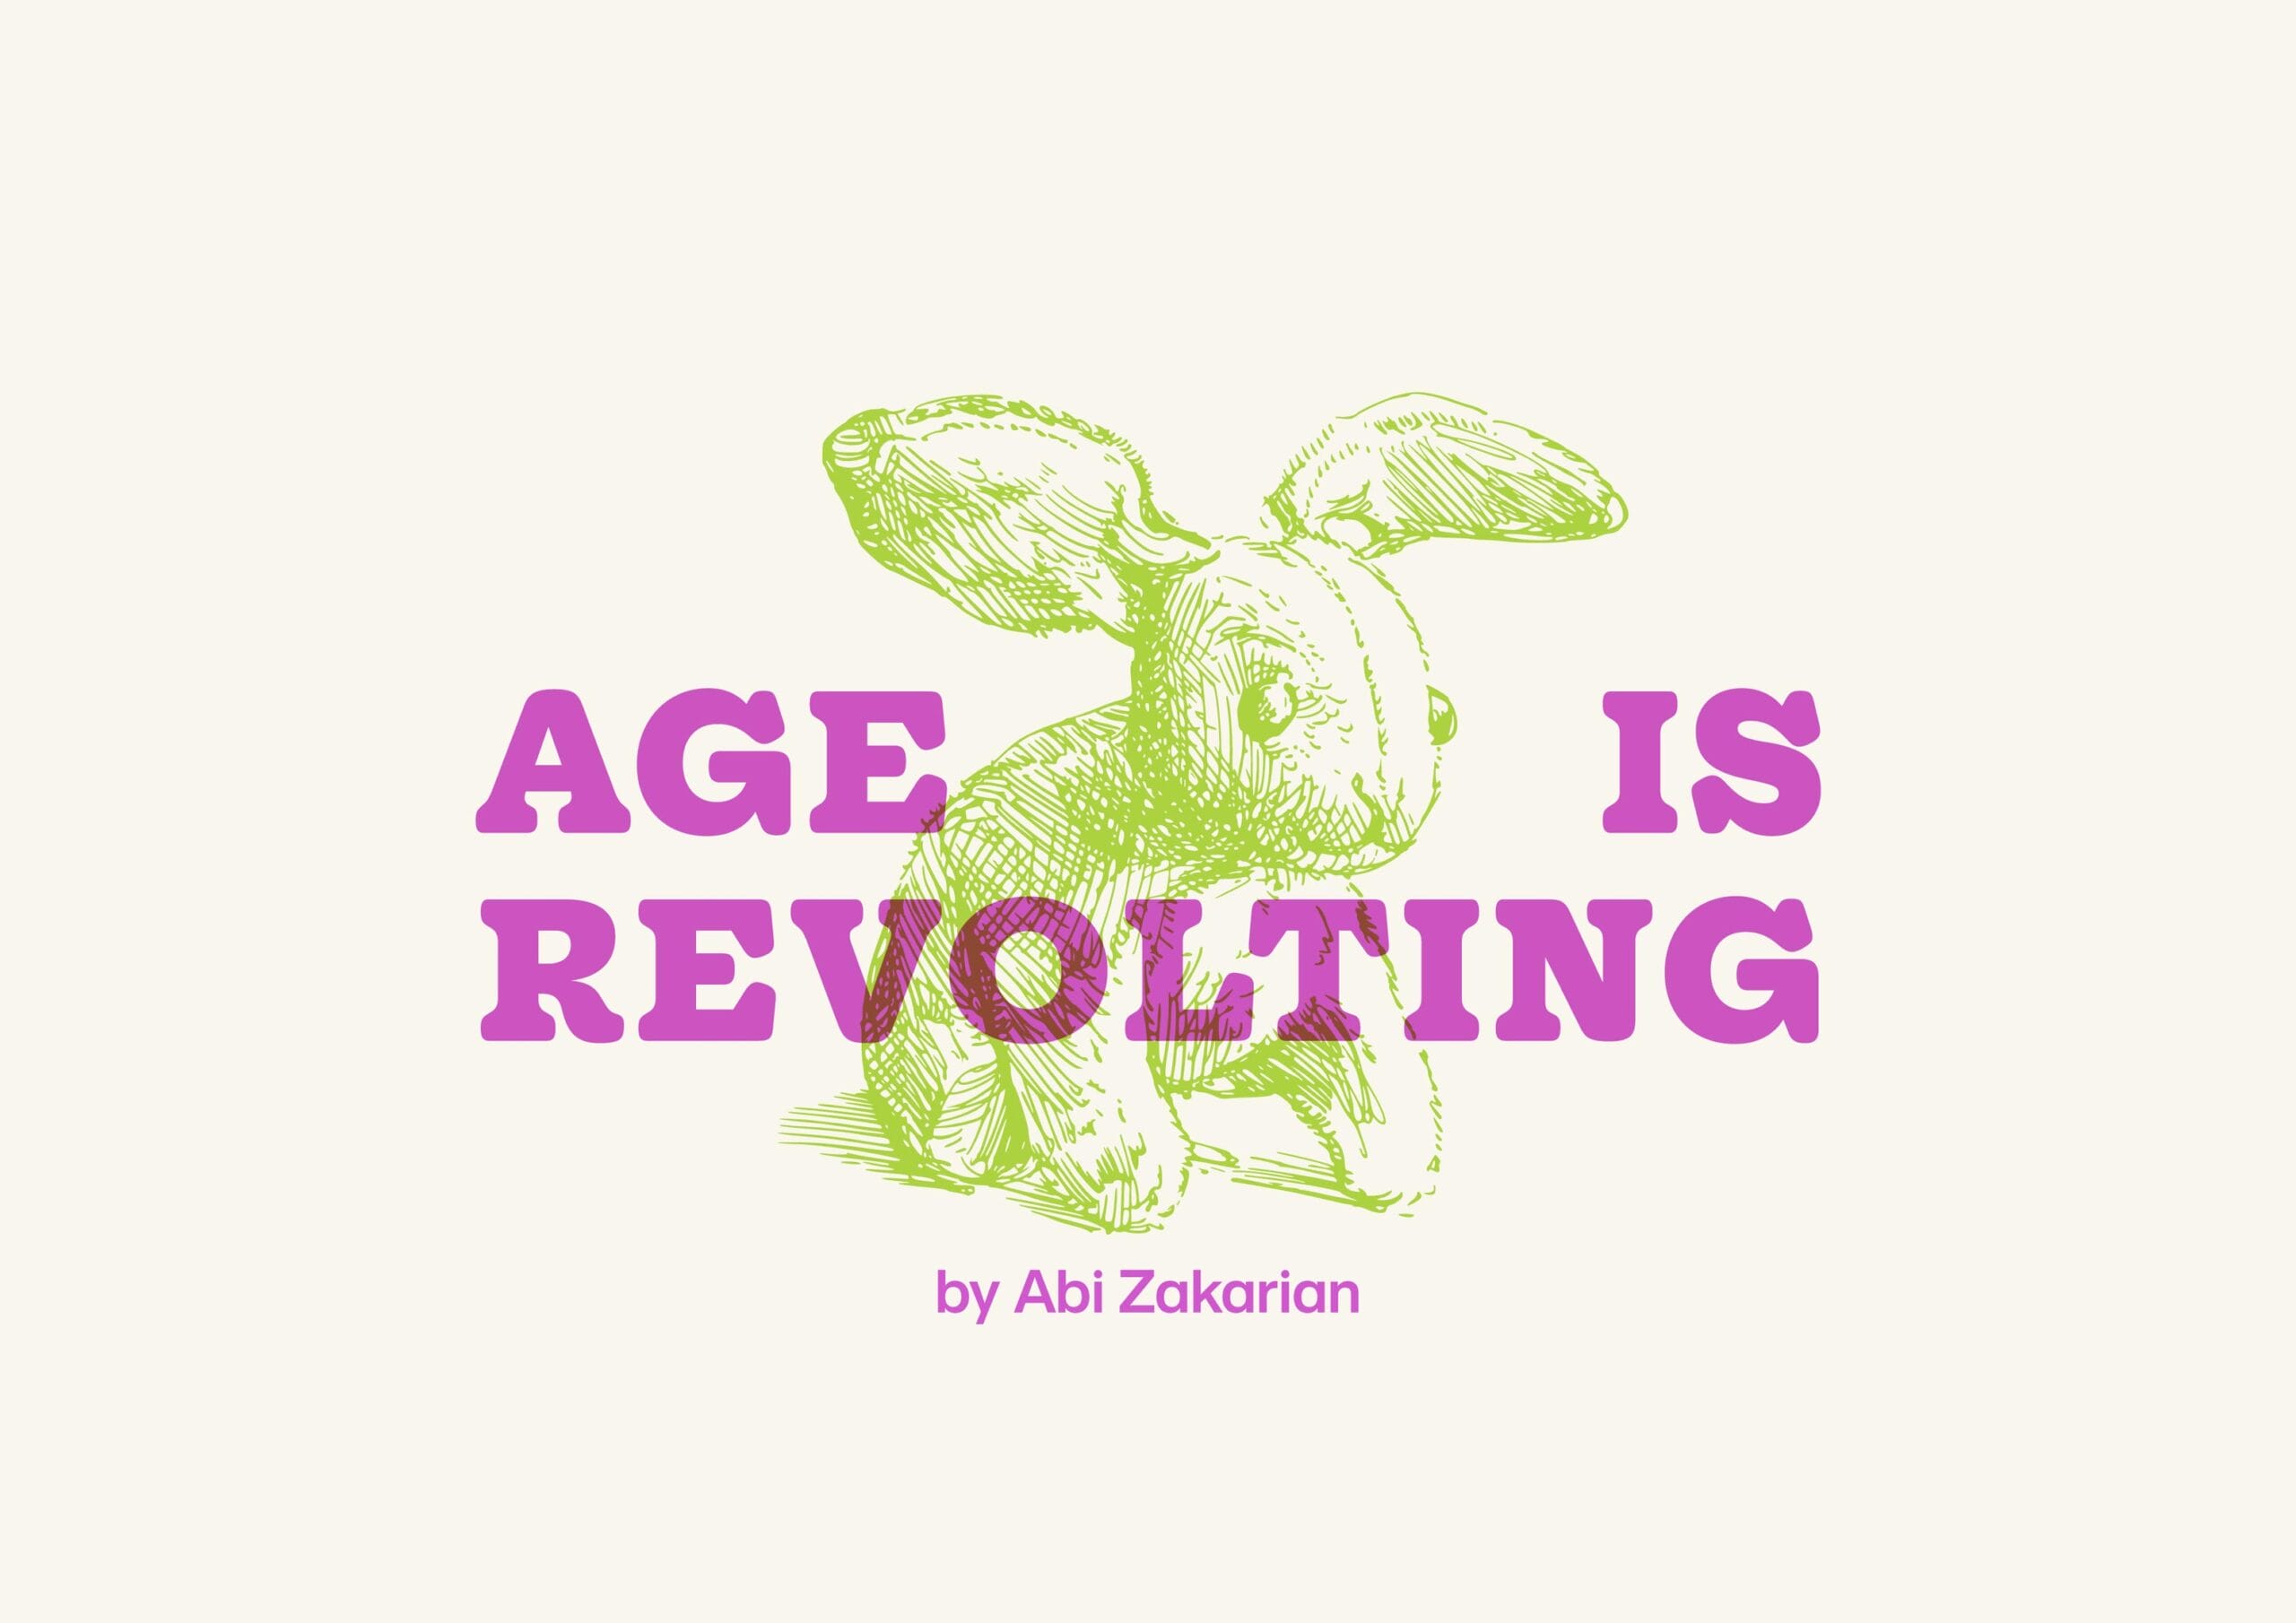 A light green illustration of a toy rabbit. Purple text on the image reads Age is Revolting by Abi Zakarian